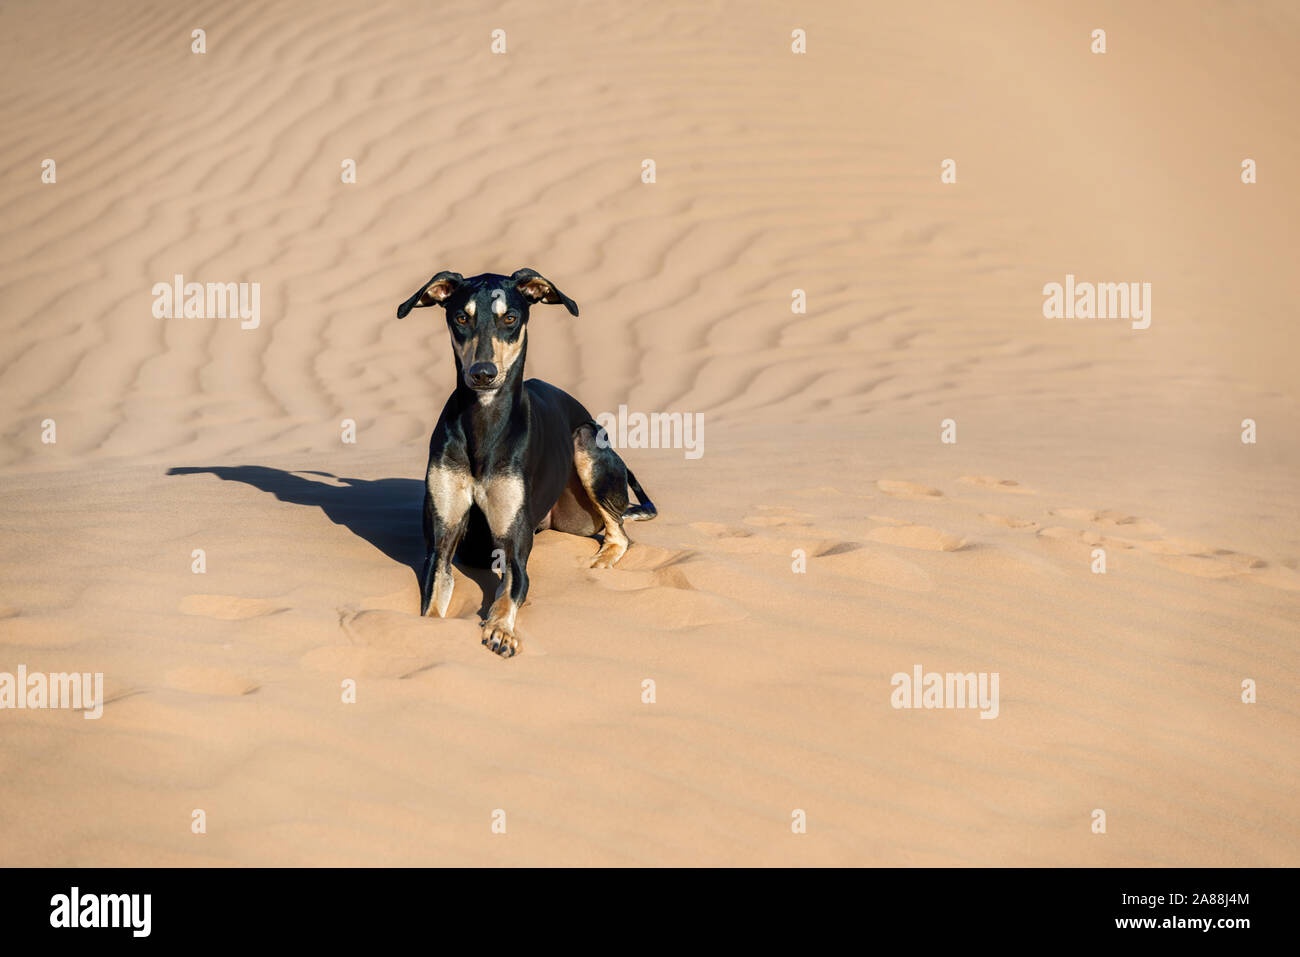 A black Sloughi dog (Arabian greyhound) rests in the sand dunes in the Sahara desert of Morocco. Stock Photo